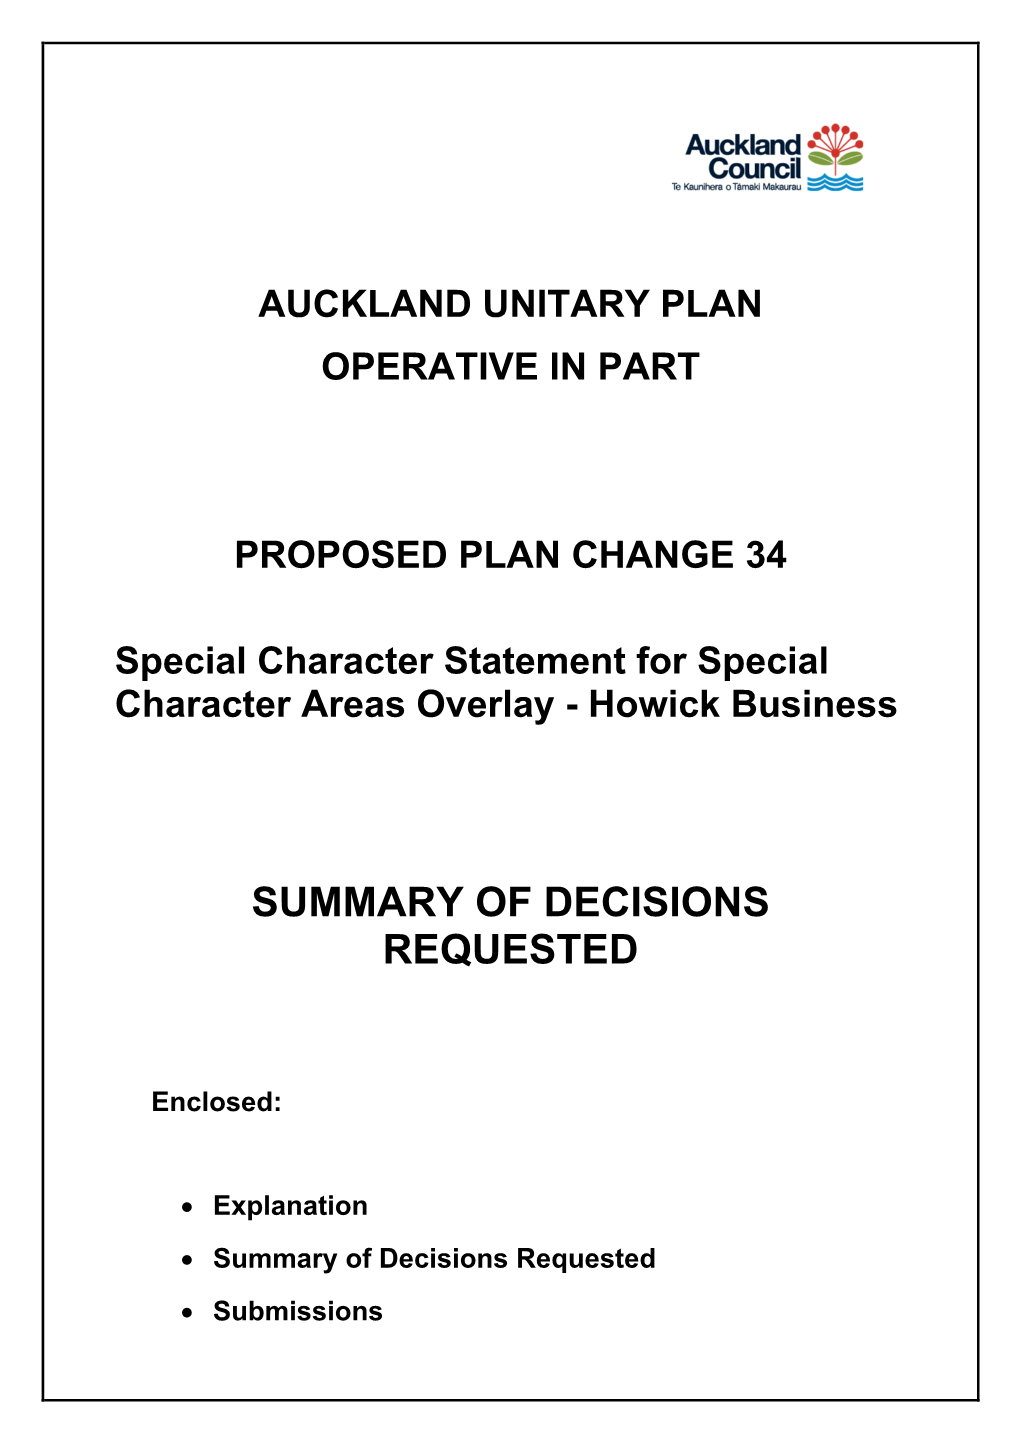 PC34 Howick Business Summary of Decisions Requested